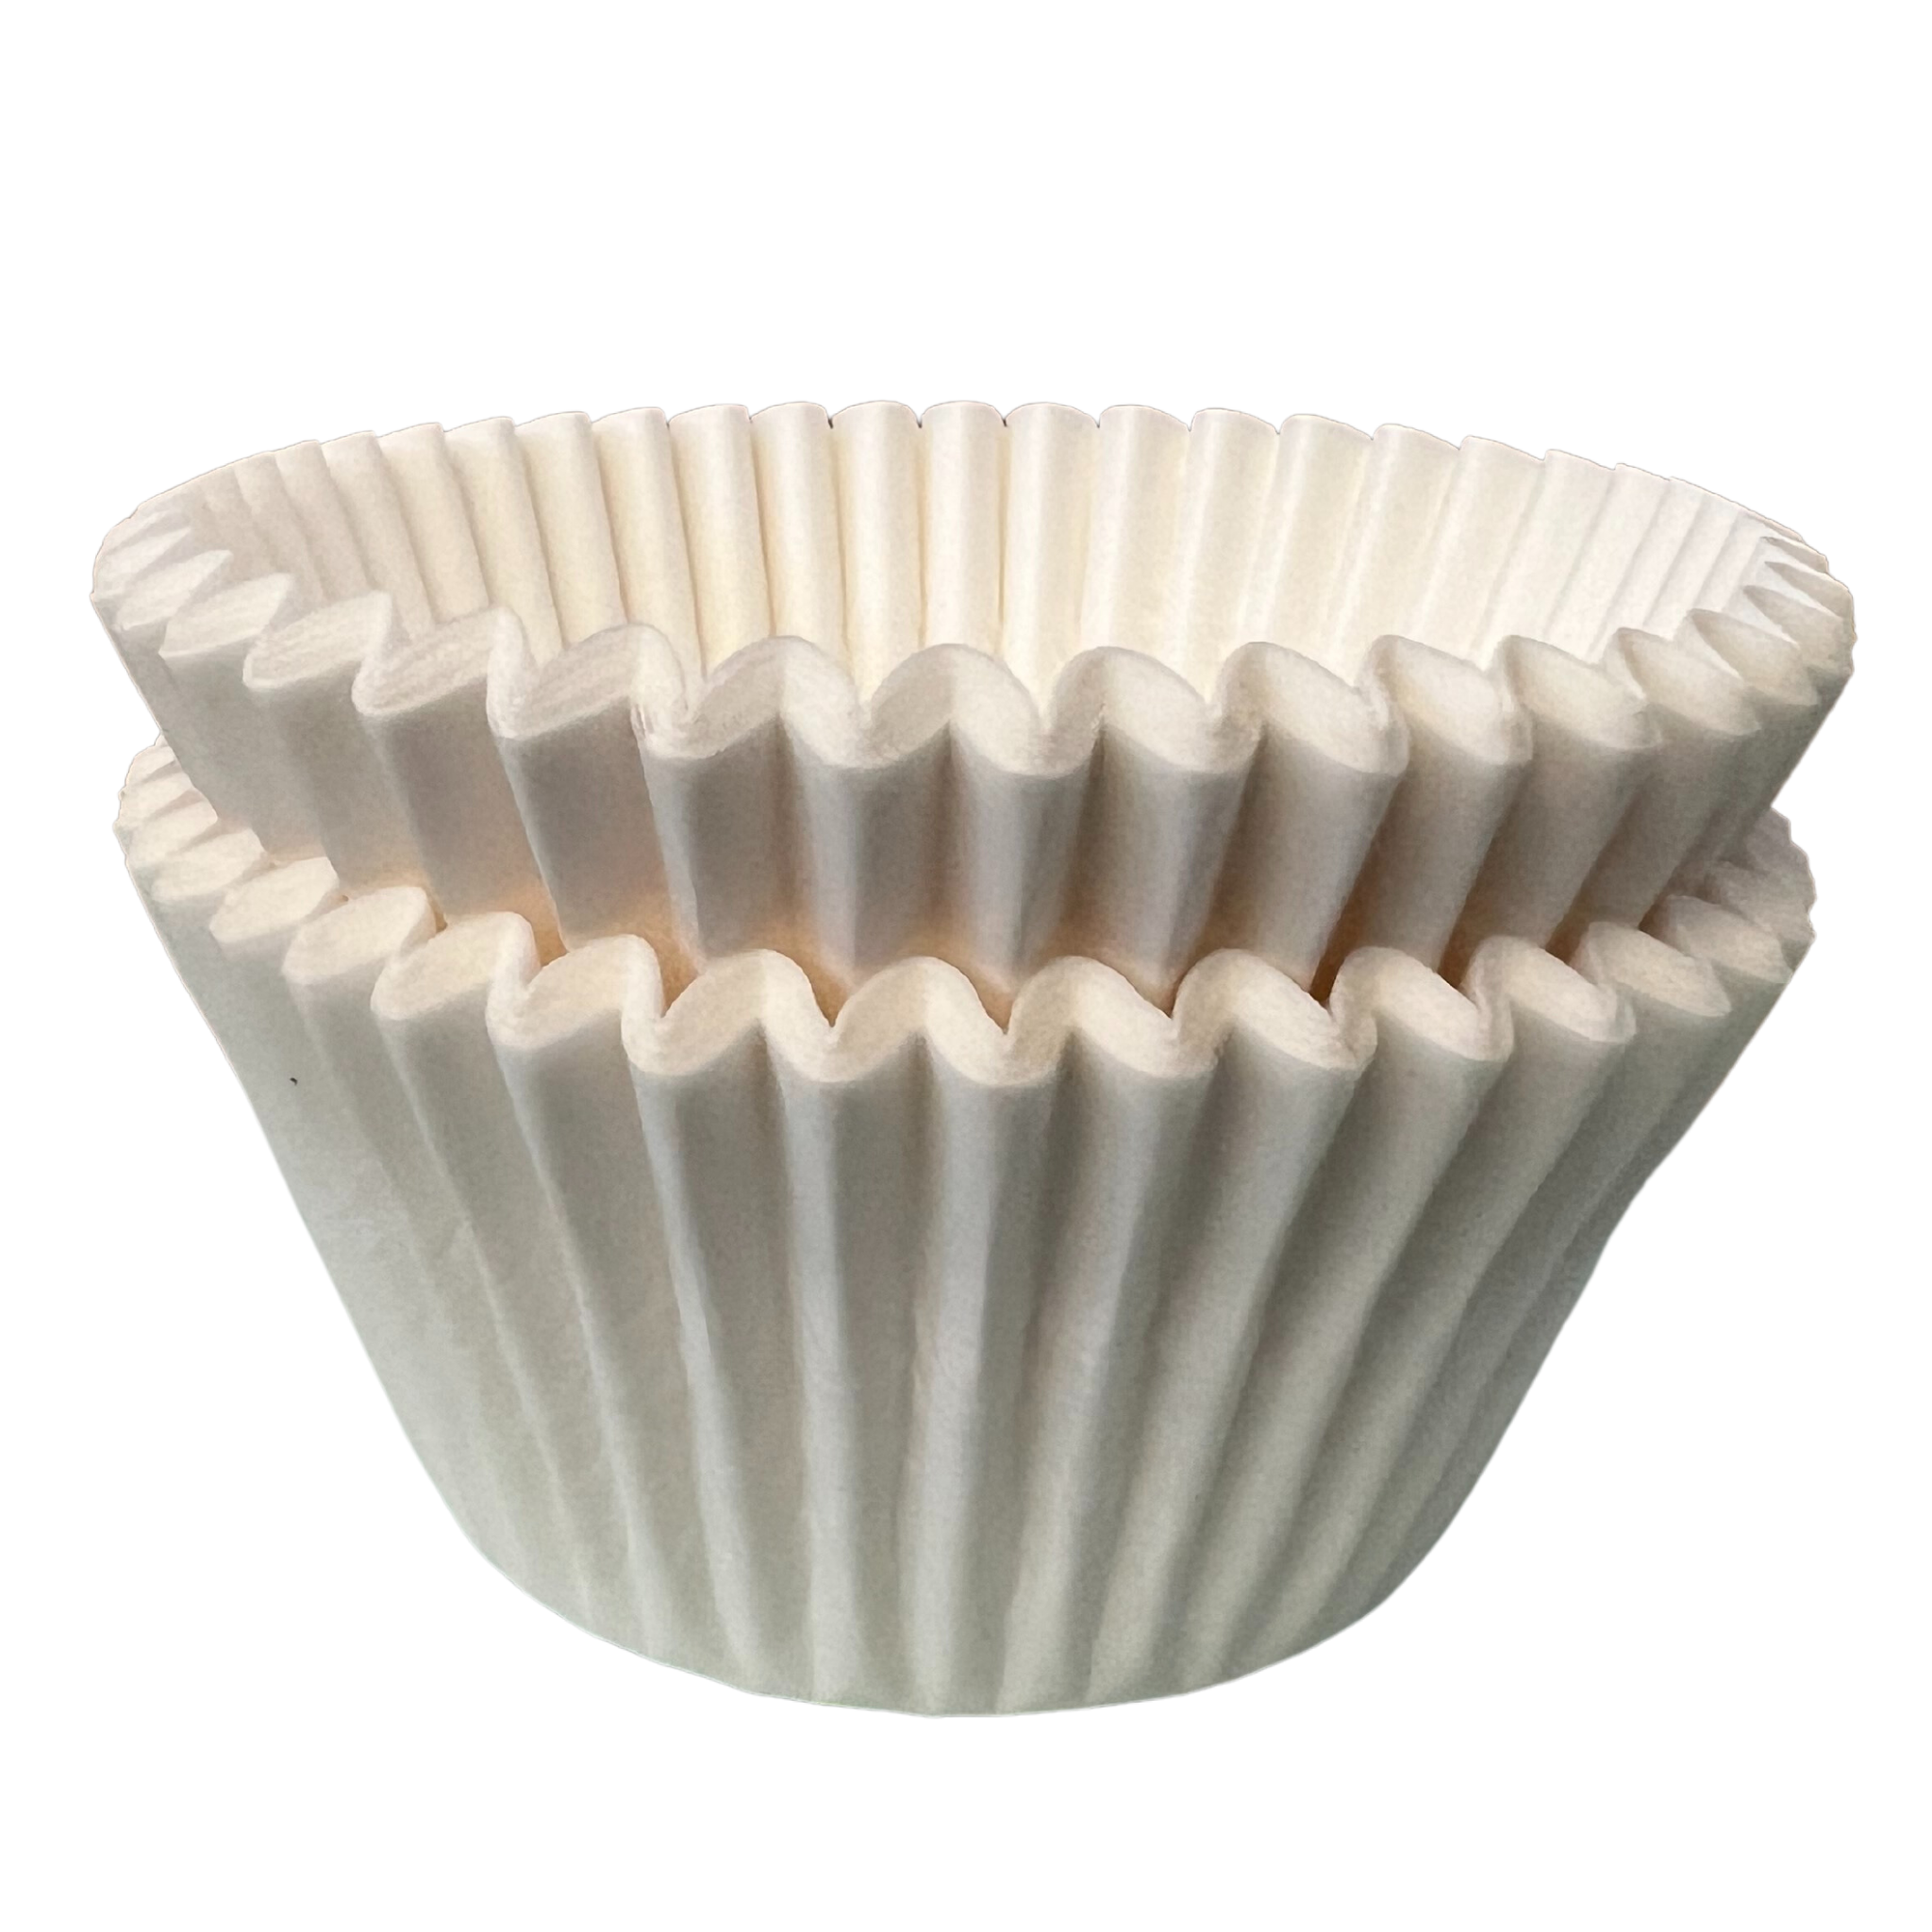 Paper Cupcake Baking Cases - pack of Approx. 50 - White